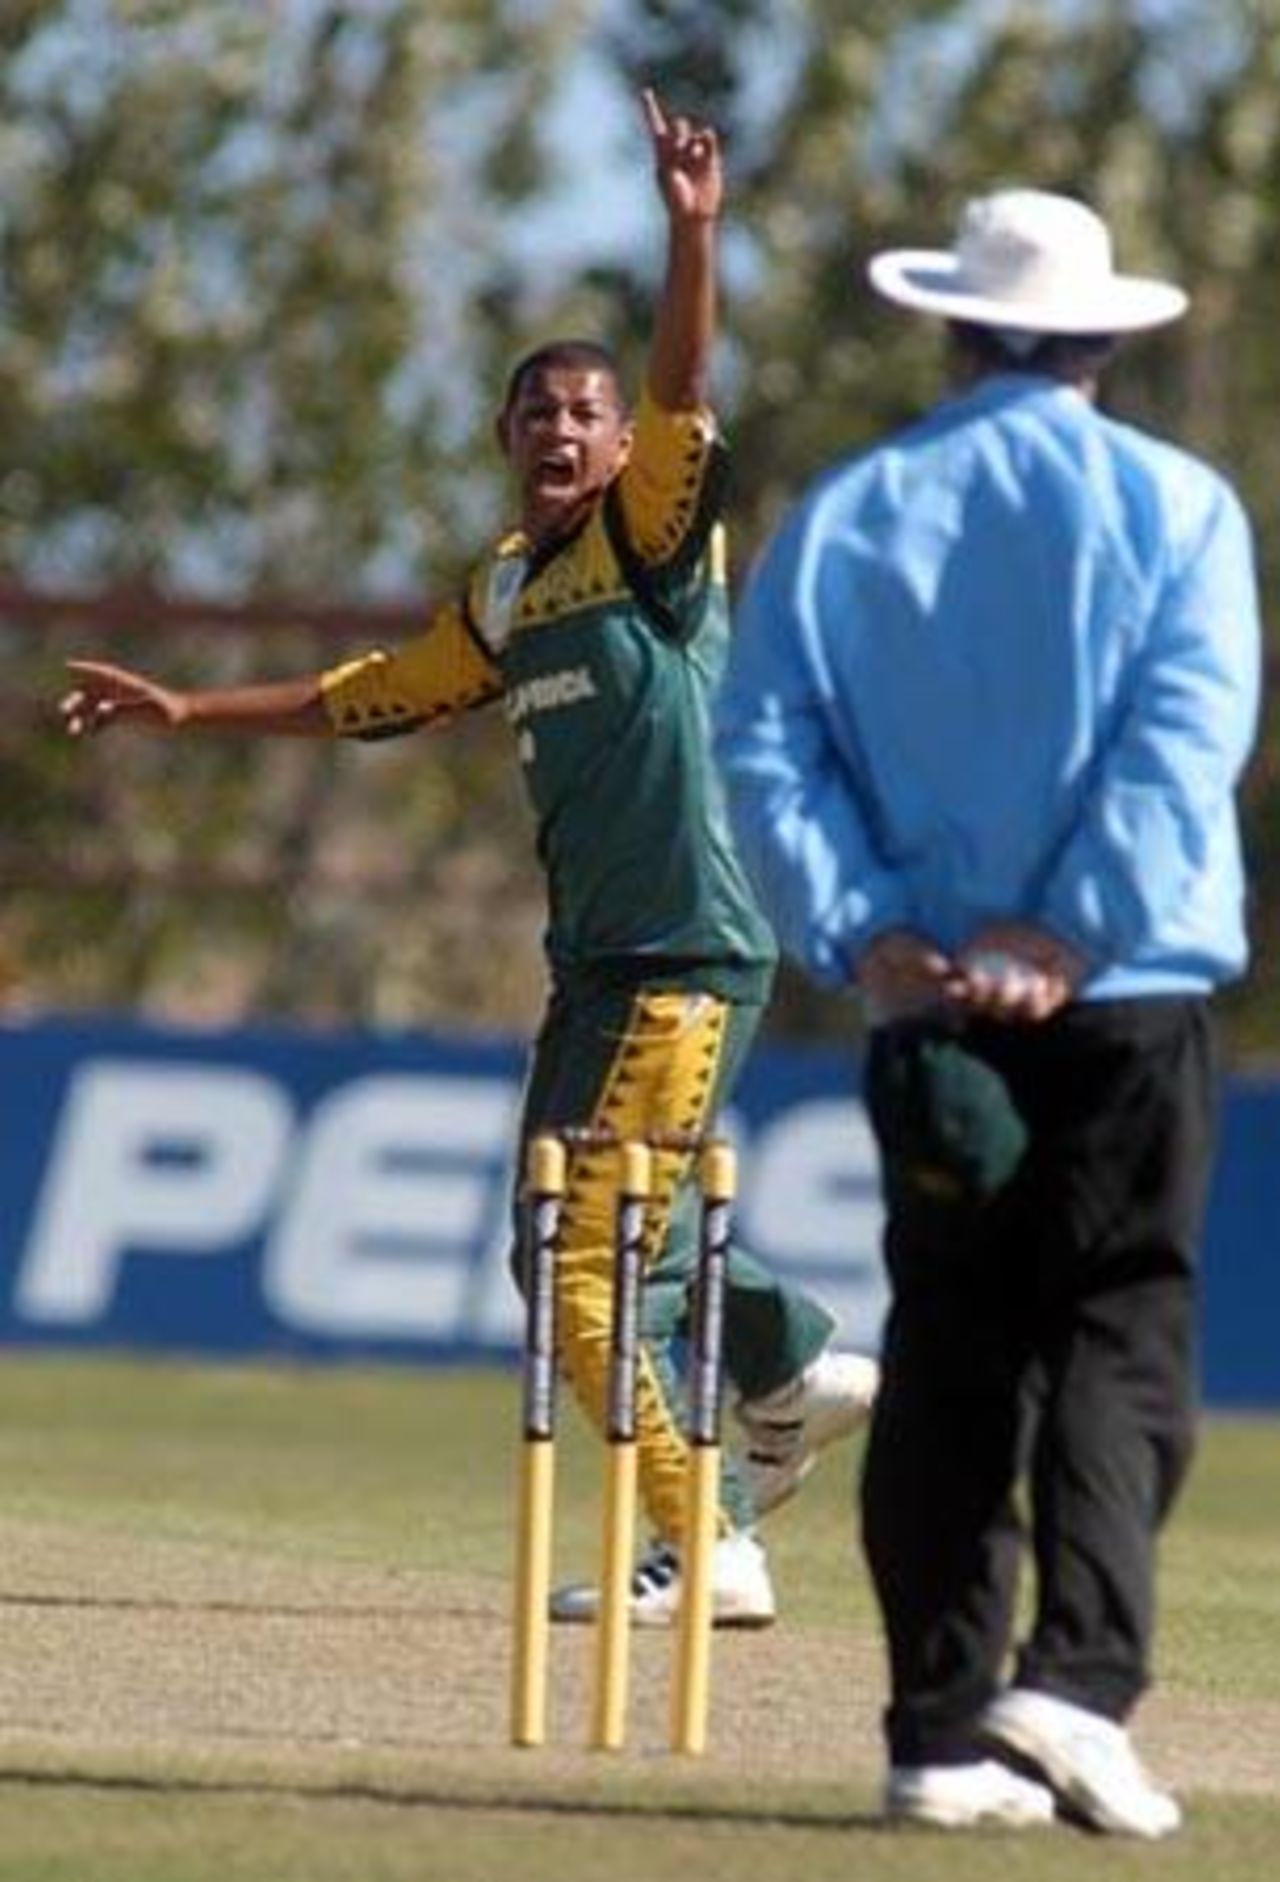 South Africa Under-19 bowler Brent Kopps unsuccessfully appeals for lbw to umpire Tony Hill during his spell of 2-38 from eight overs. 1st ICC Under-19 World Cup Super League Semi Final: India Under-19s v South Africa Under-19s at Bert Sutcliffe Oval, Lincoln, 3 February 2002.